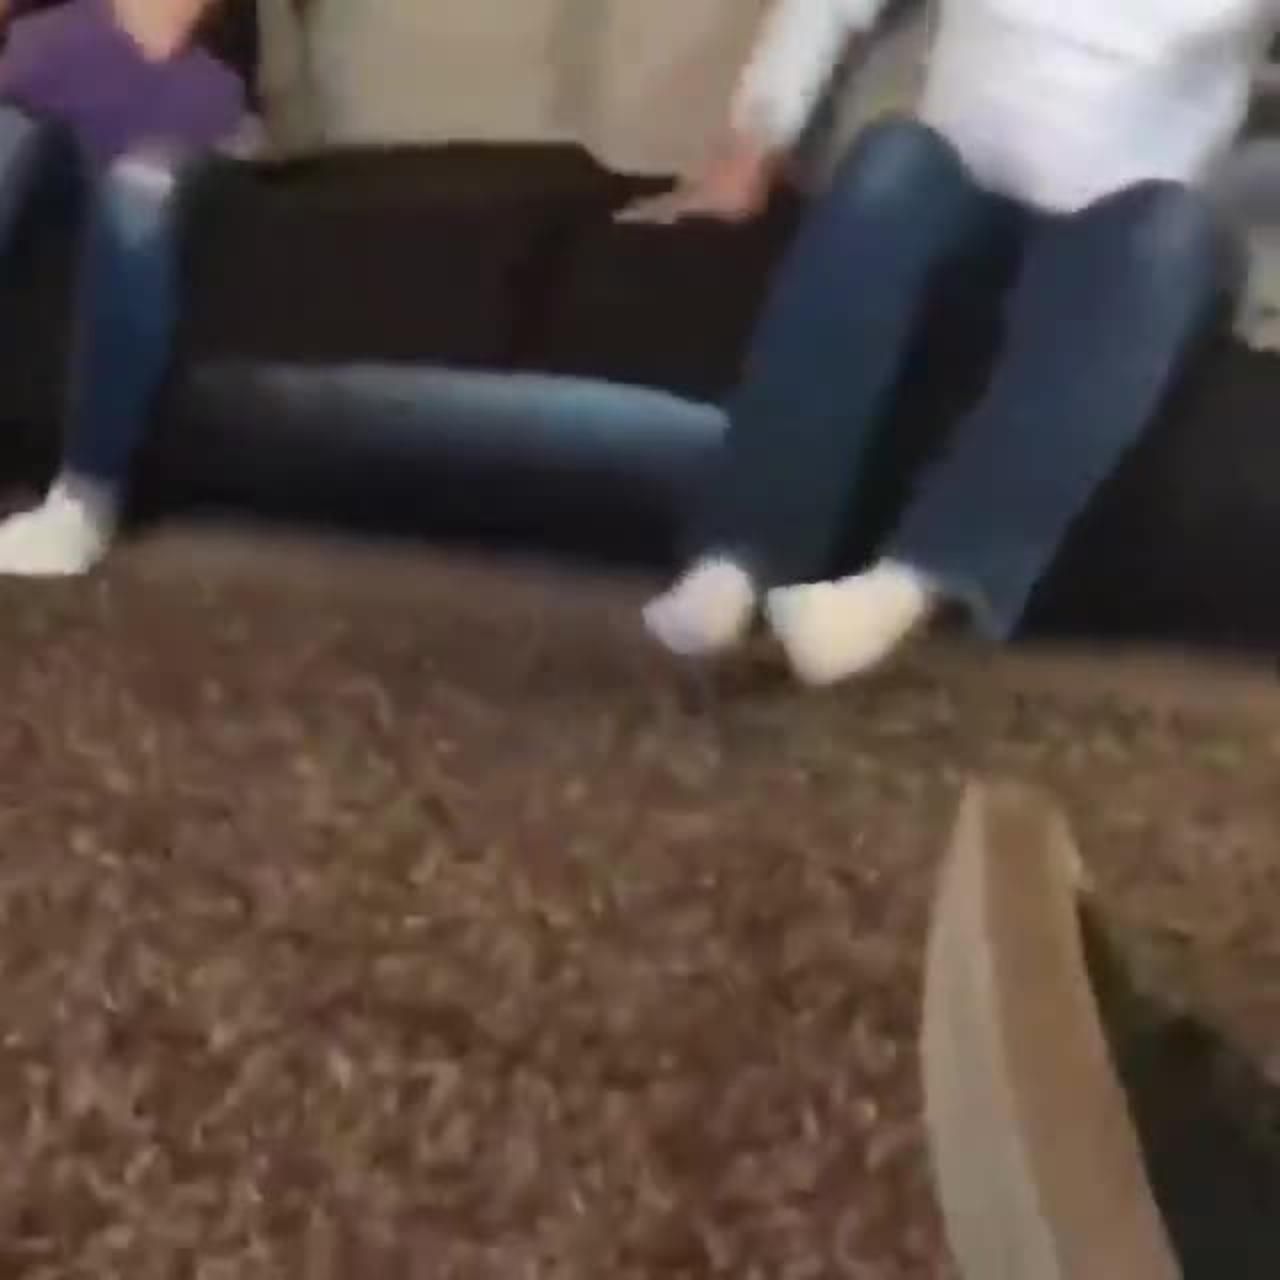 Baby Sis Flying Kicks Her Lil Bro's Face